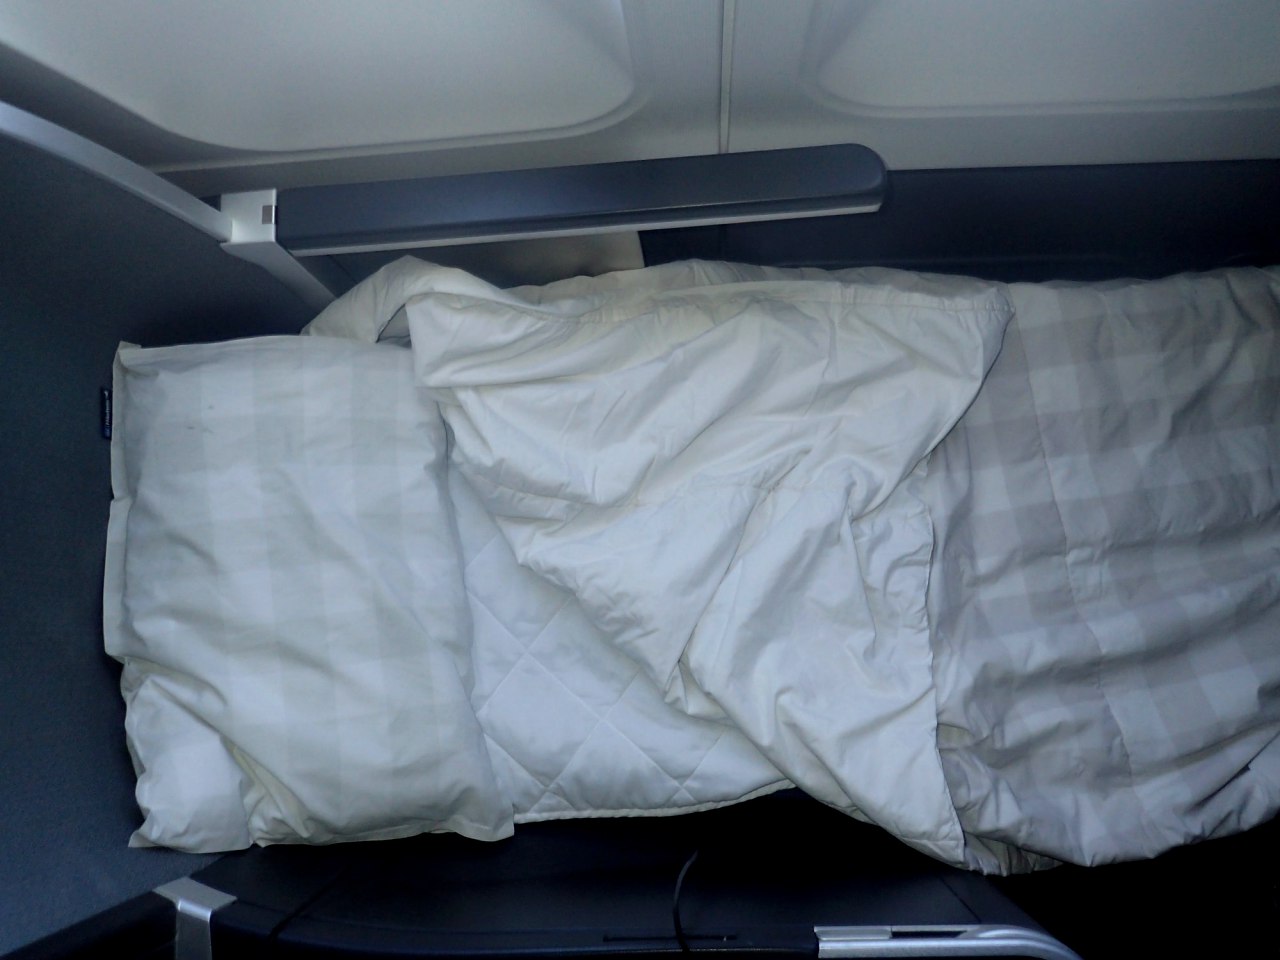 Review: SAS Business Class Bed, A340